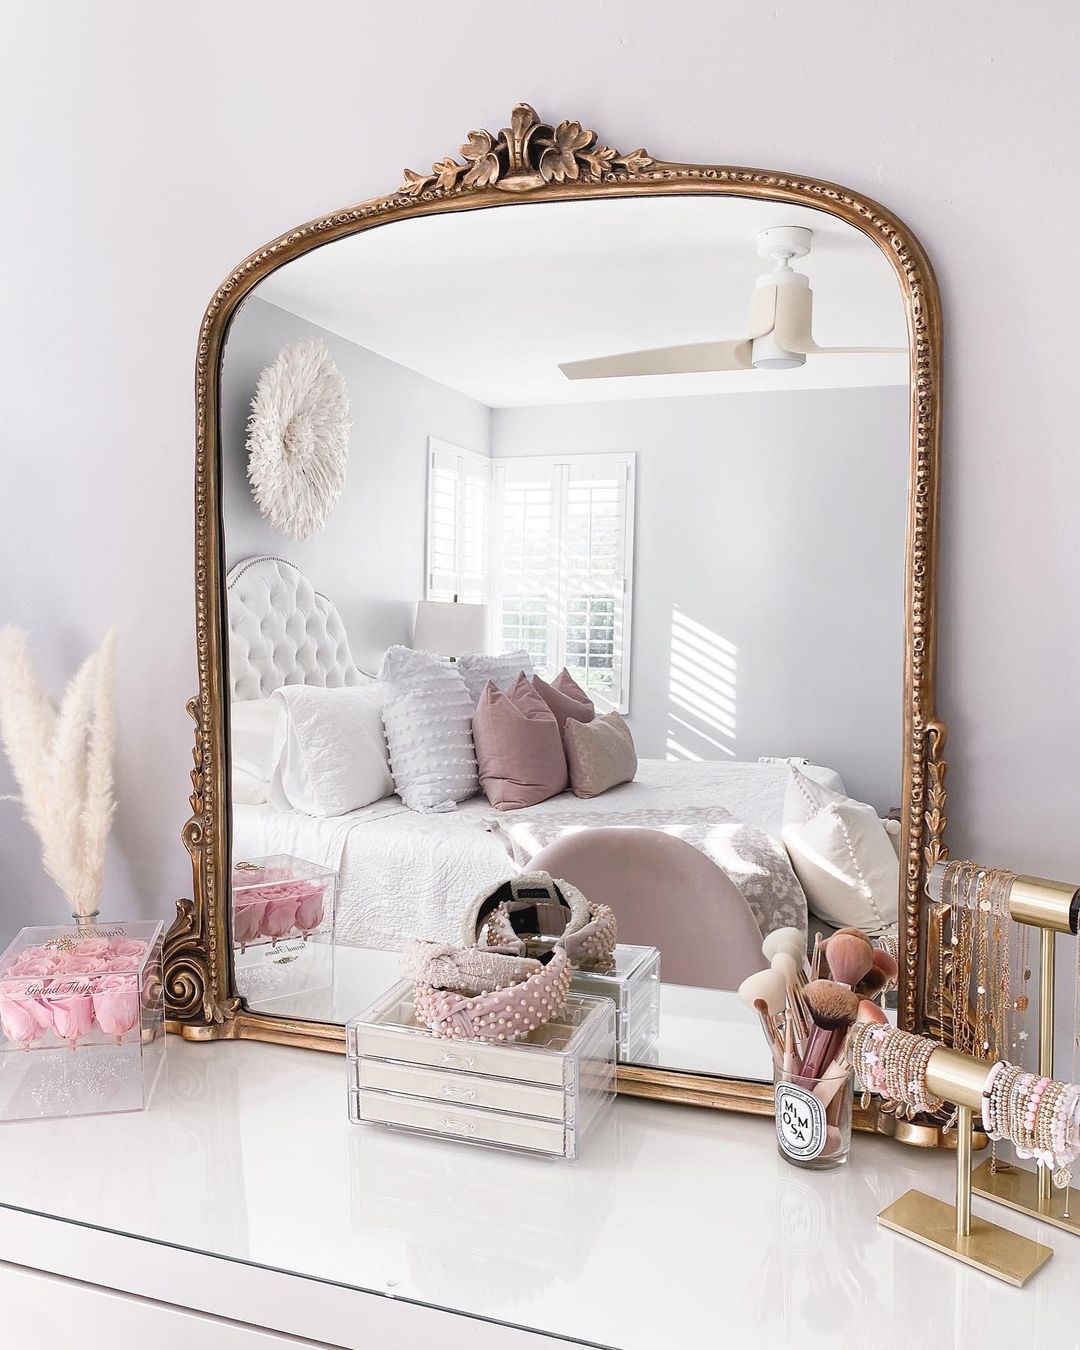 Large mirror with decorative brass finish sitting on dresser. Photo by Instagram User @fancythingsblog